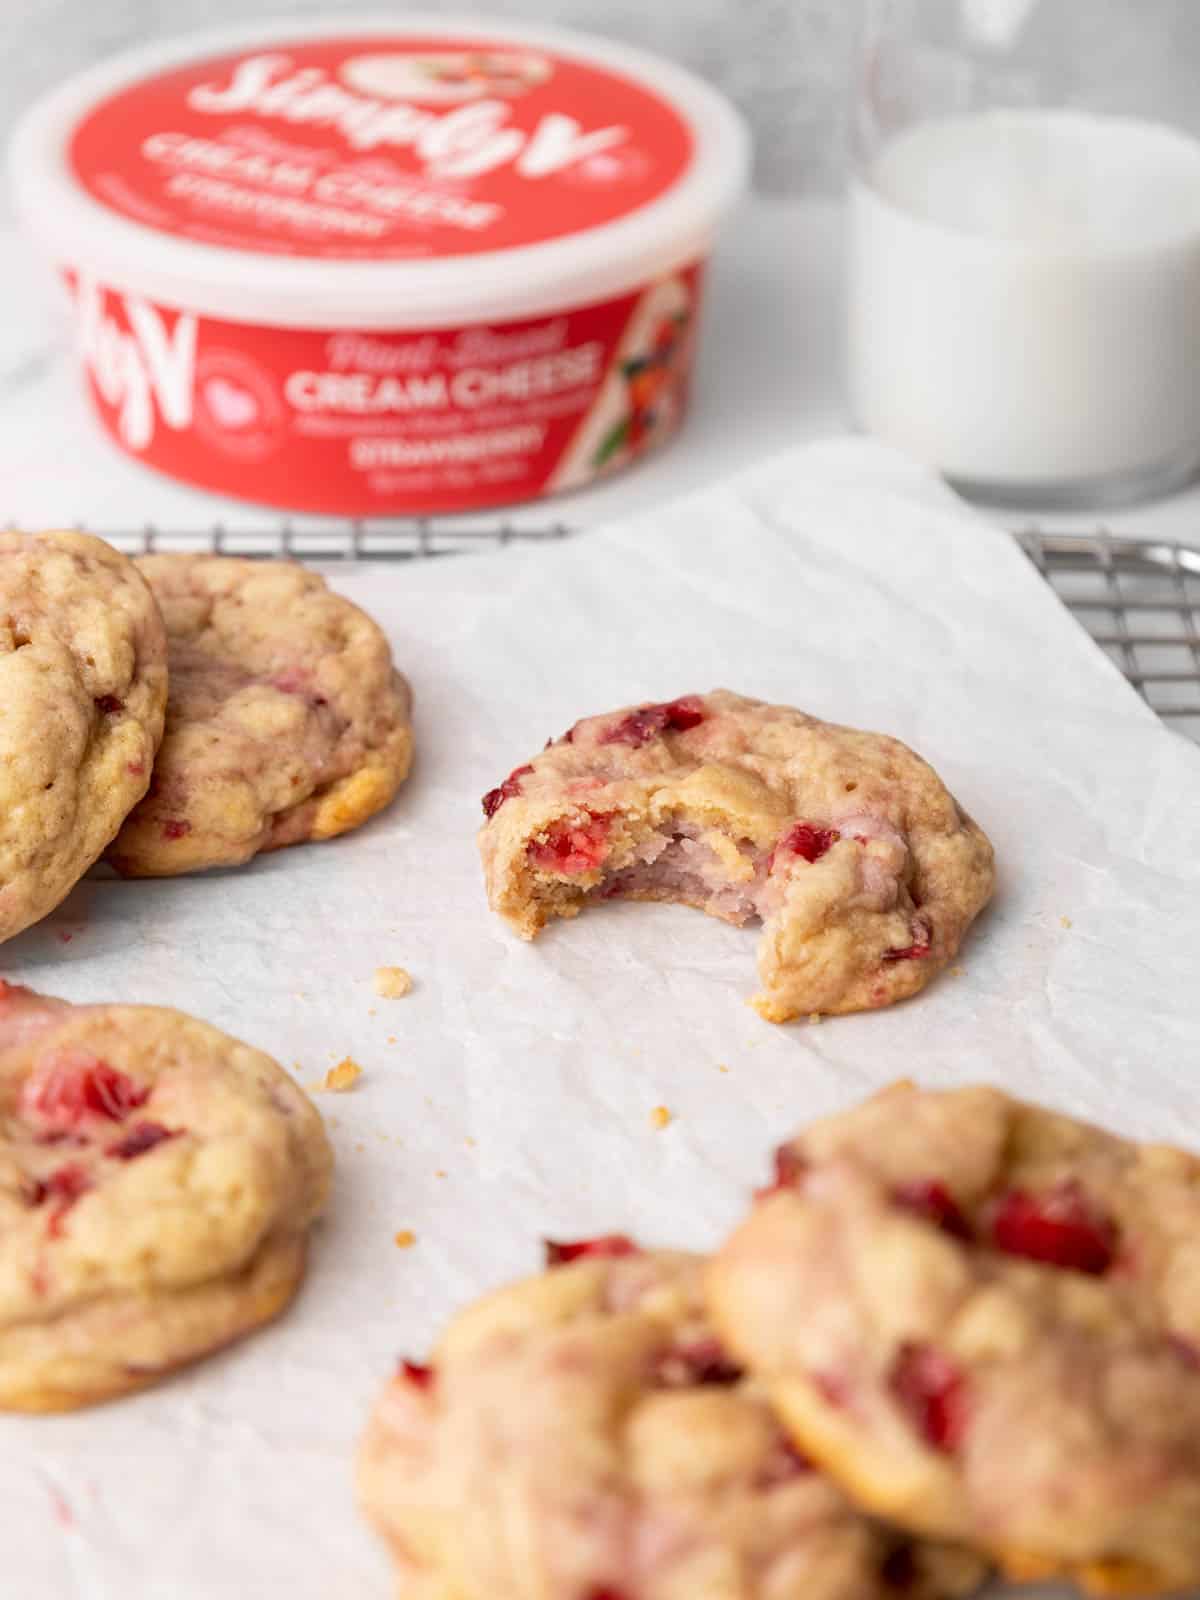 A strawberry cheesecake cookie has been bit into, showing the texture and cream cheese filling inside. It is surrounded by more cookies, a milk jar, and SimplyV's strawberry cream cheese.